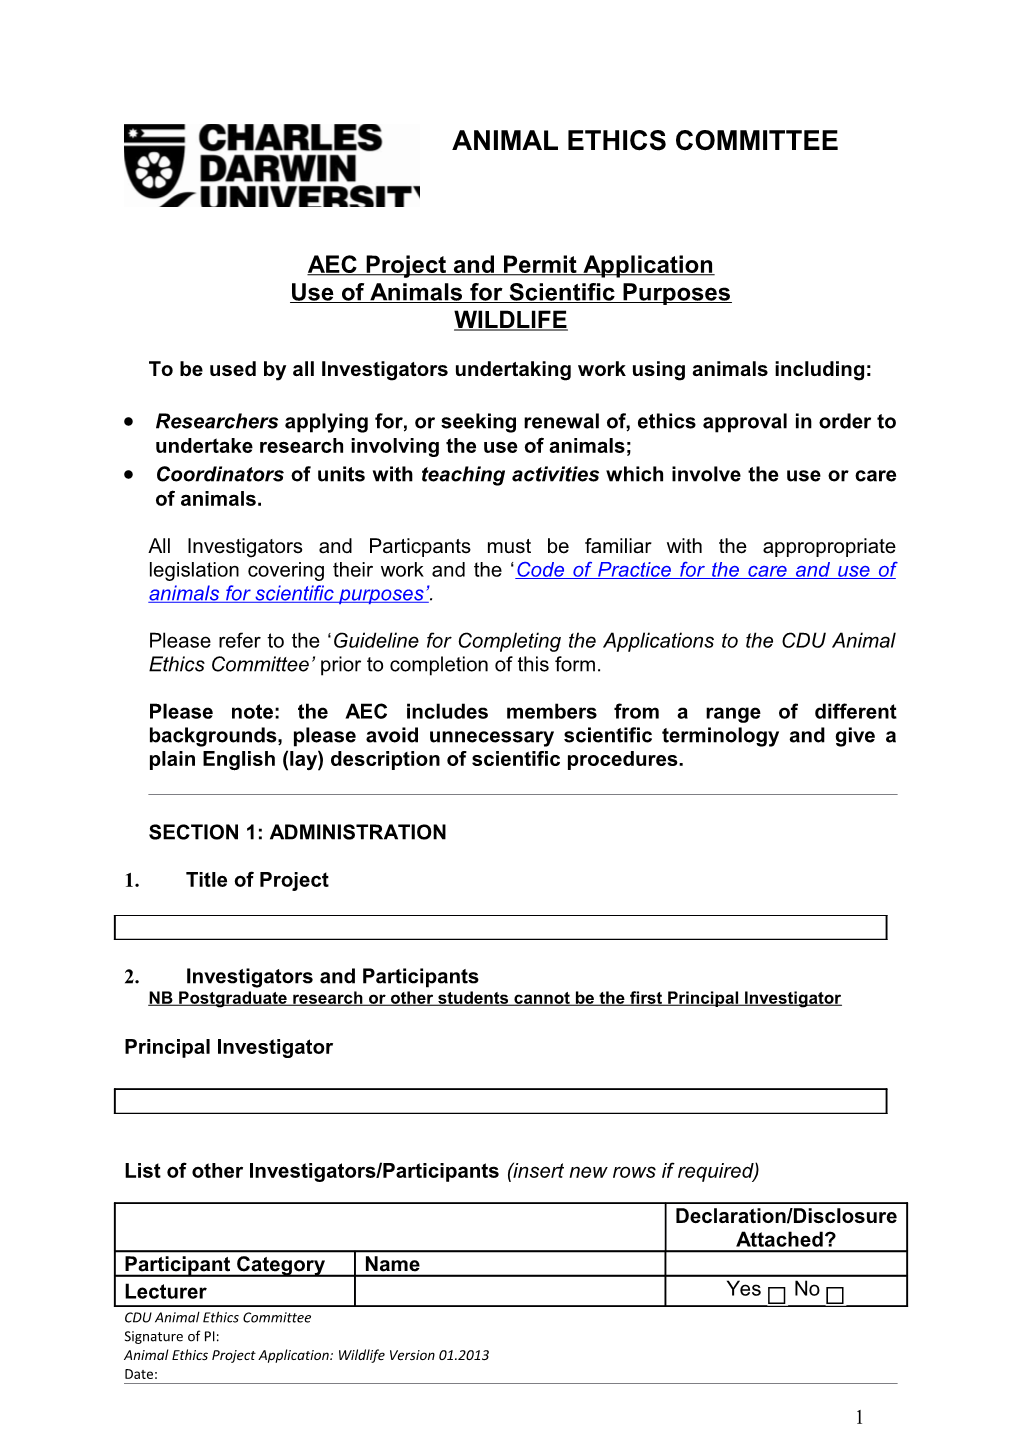 AEC Project and Permit Application s1